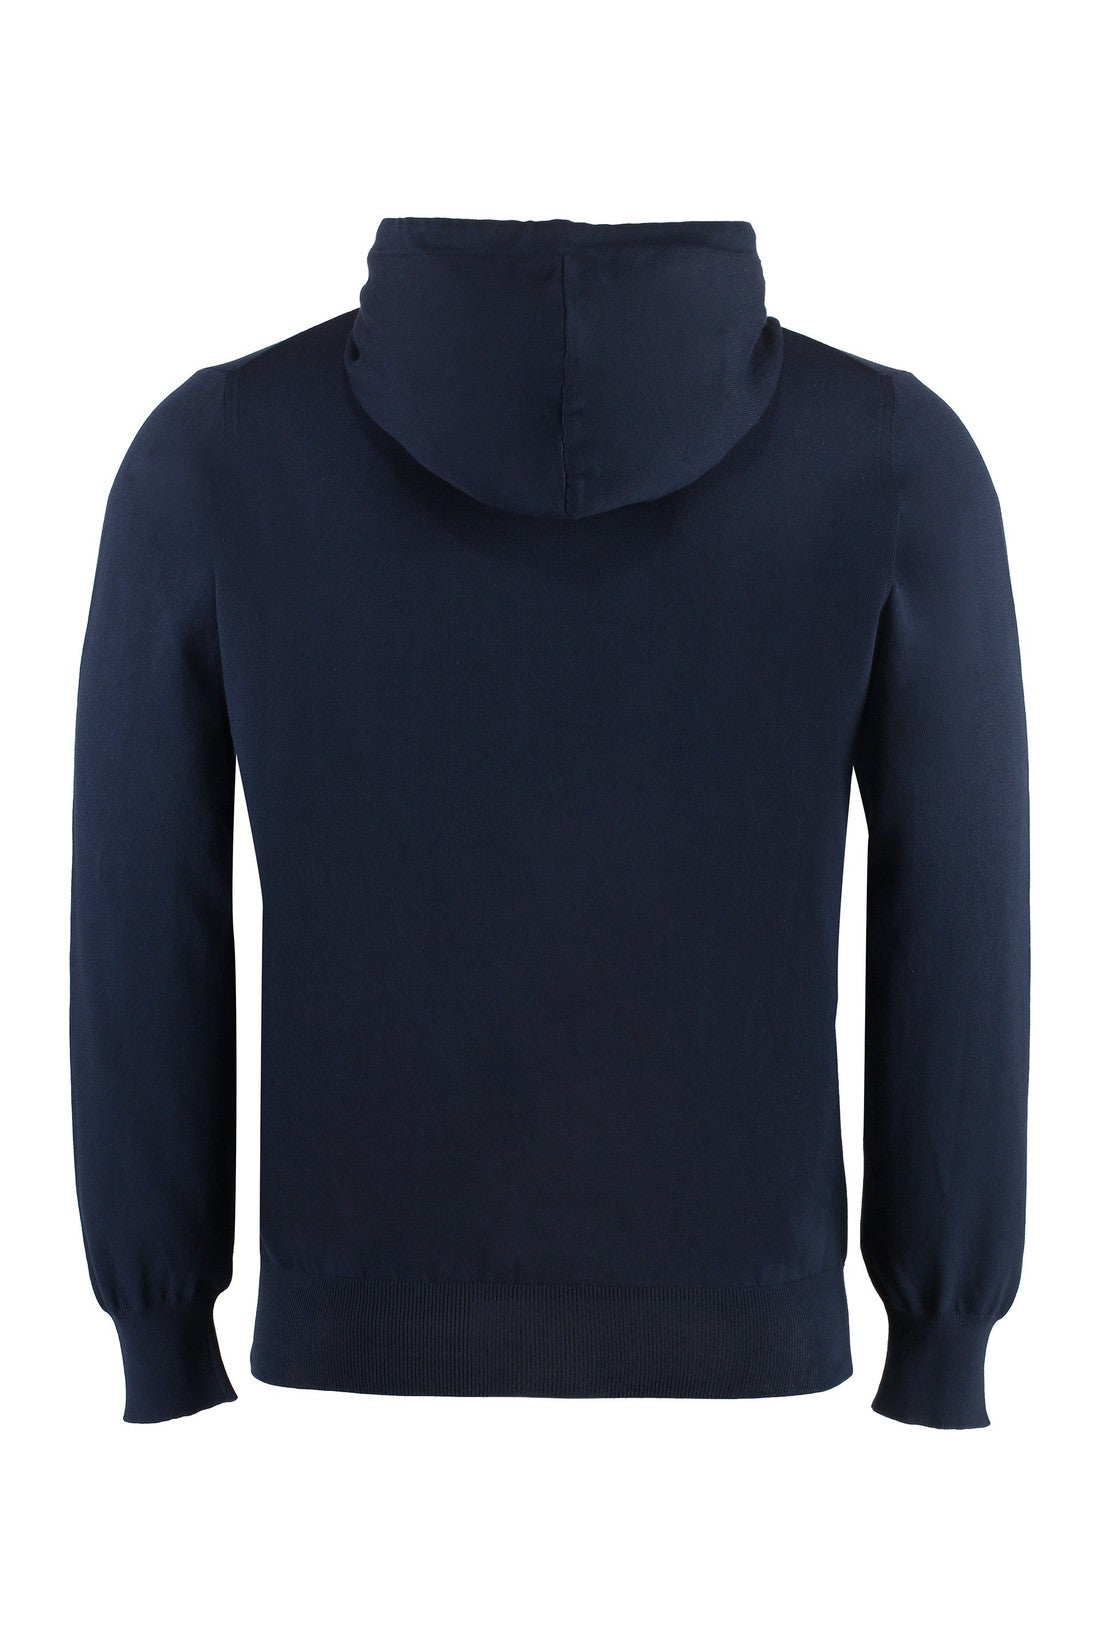 Canali-OUTLET-SALE-Knitted hoodie-ARCHIVIST